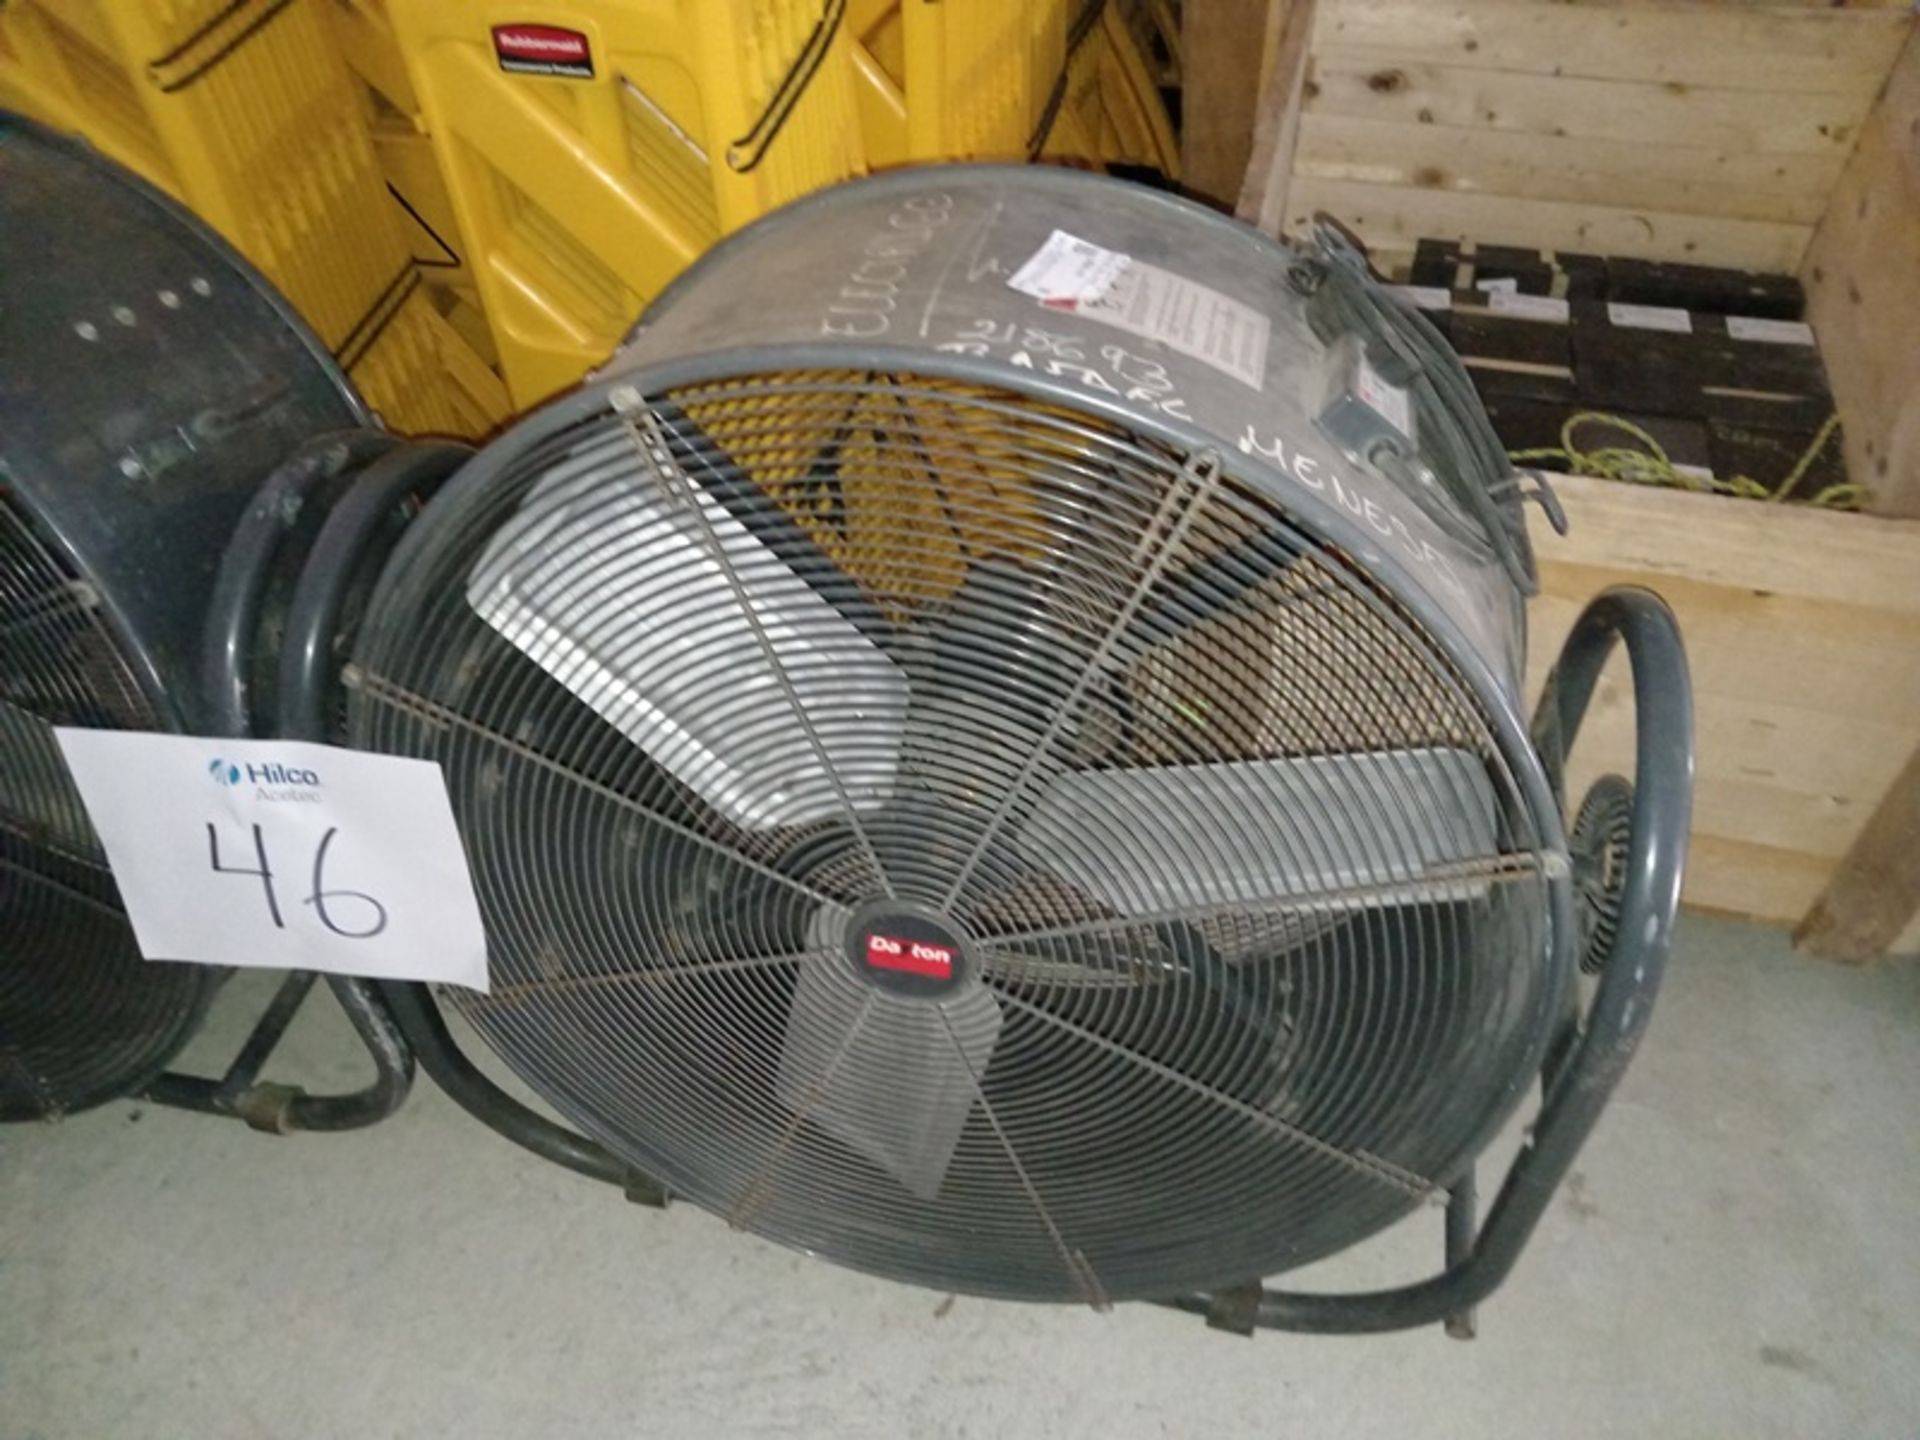 LOT OF (2) 42" HIGH POWER DRUM TYPE FANS - Image 2 of 3